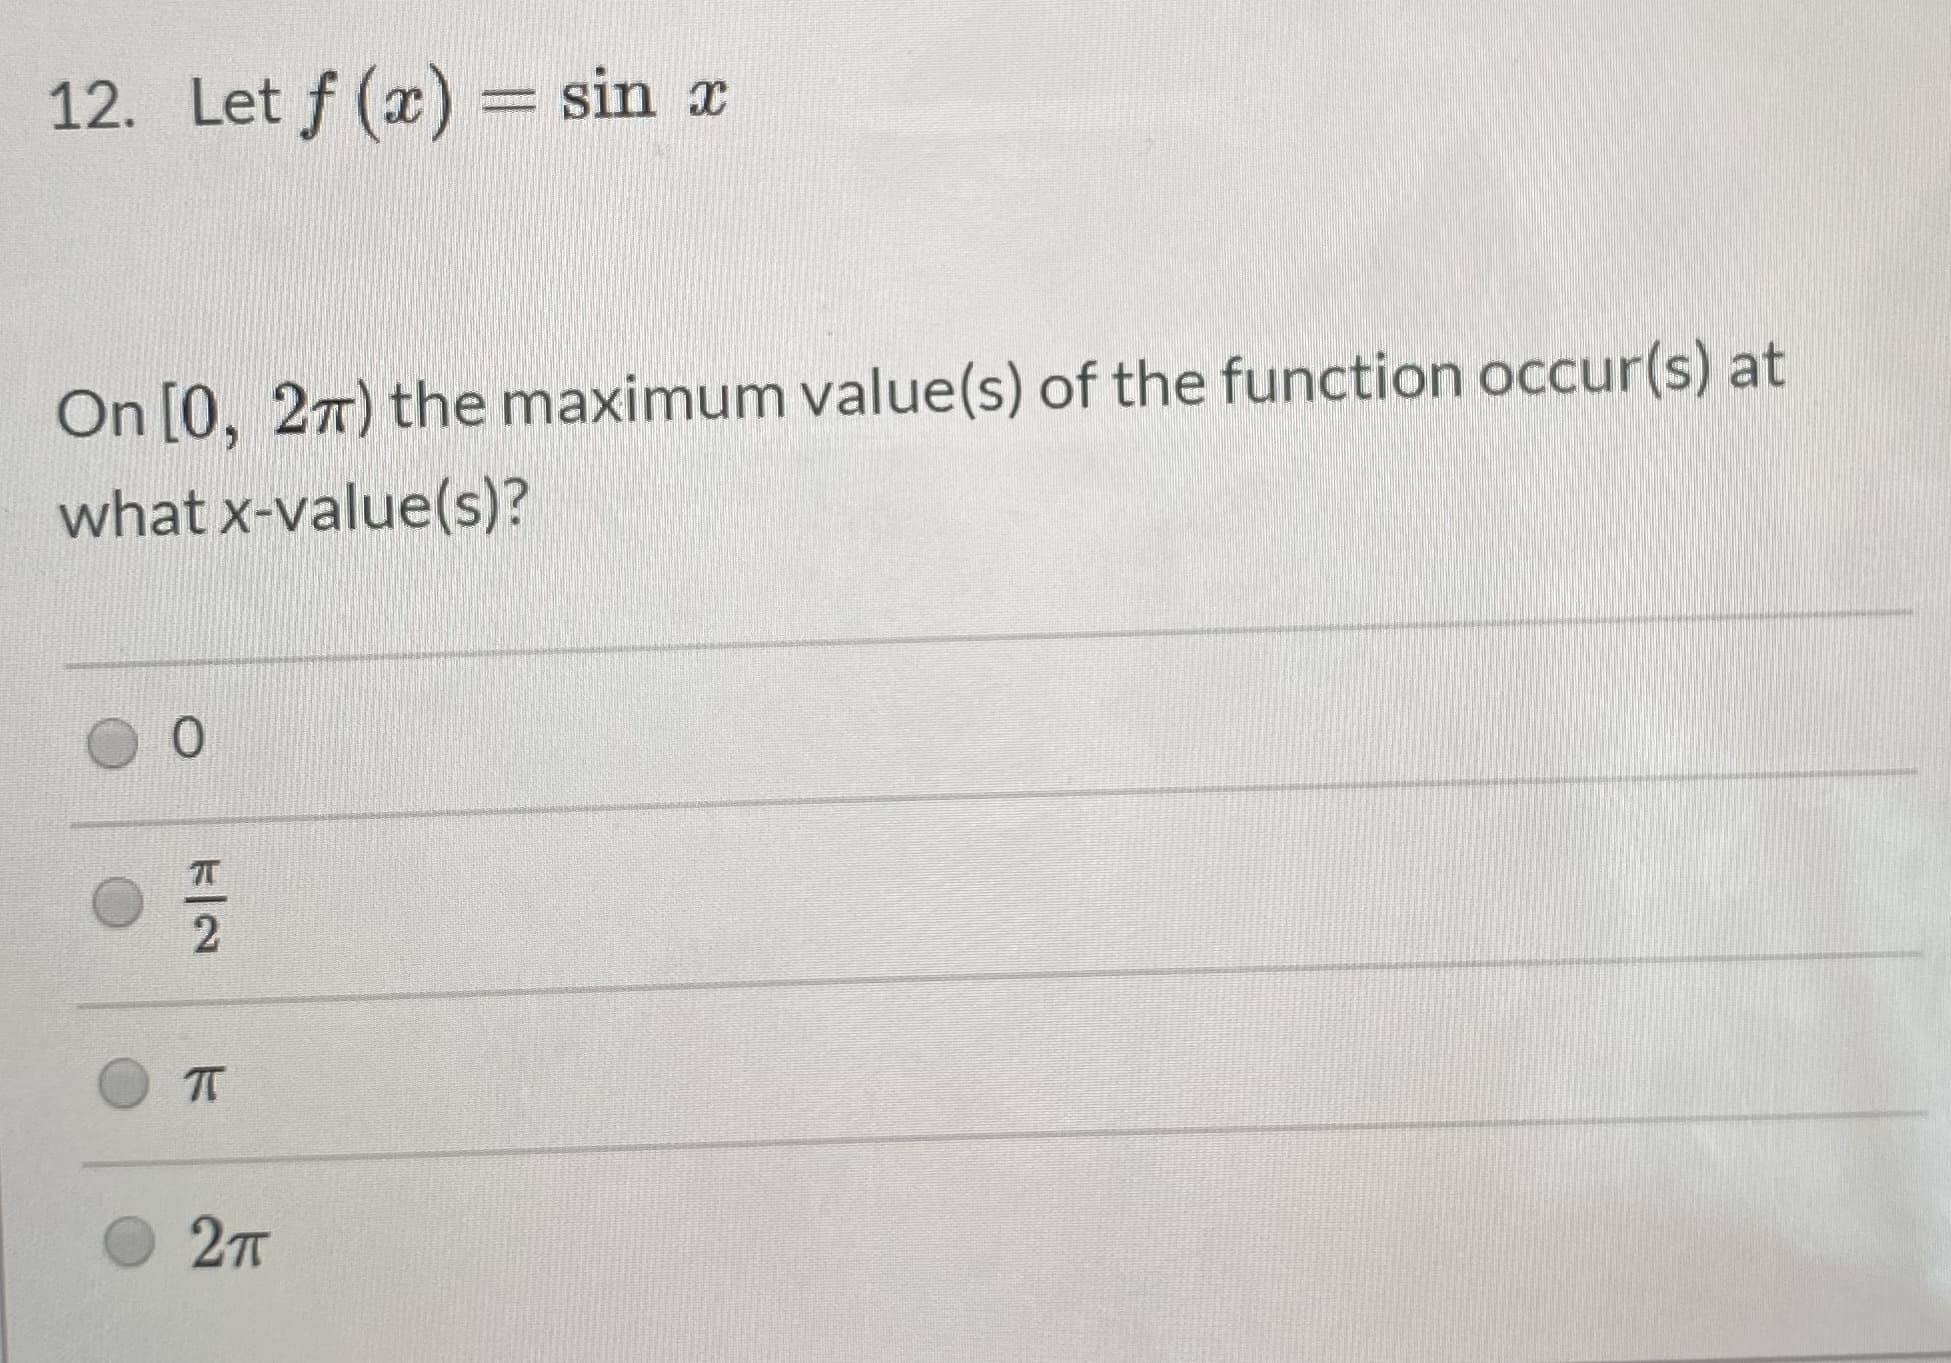 12. Let f (x) = sin x
On [0, 27) the maximum value(s) of the function occur(s) at
what x-value(s)?
TT
2T
